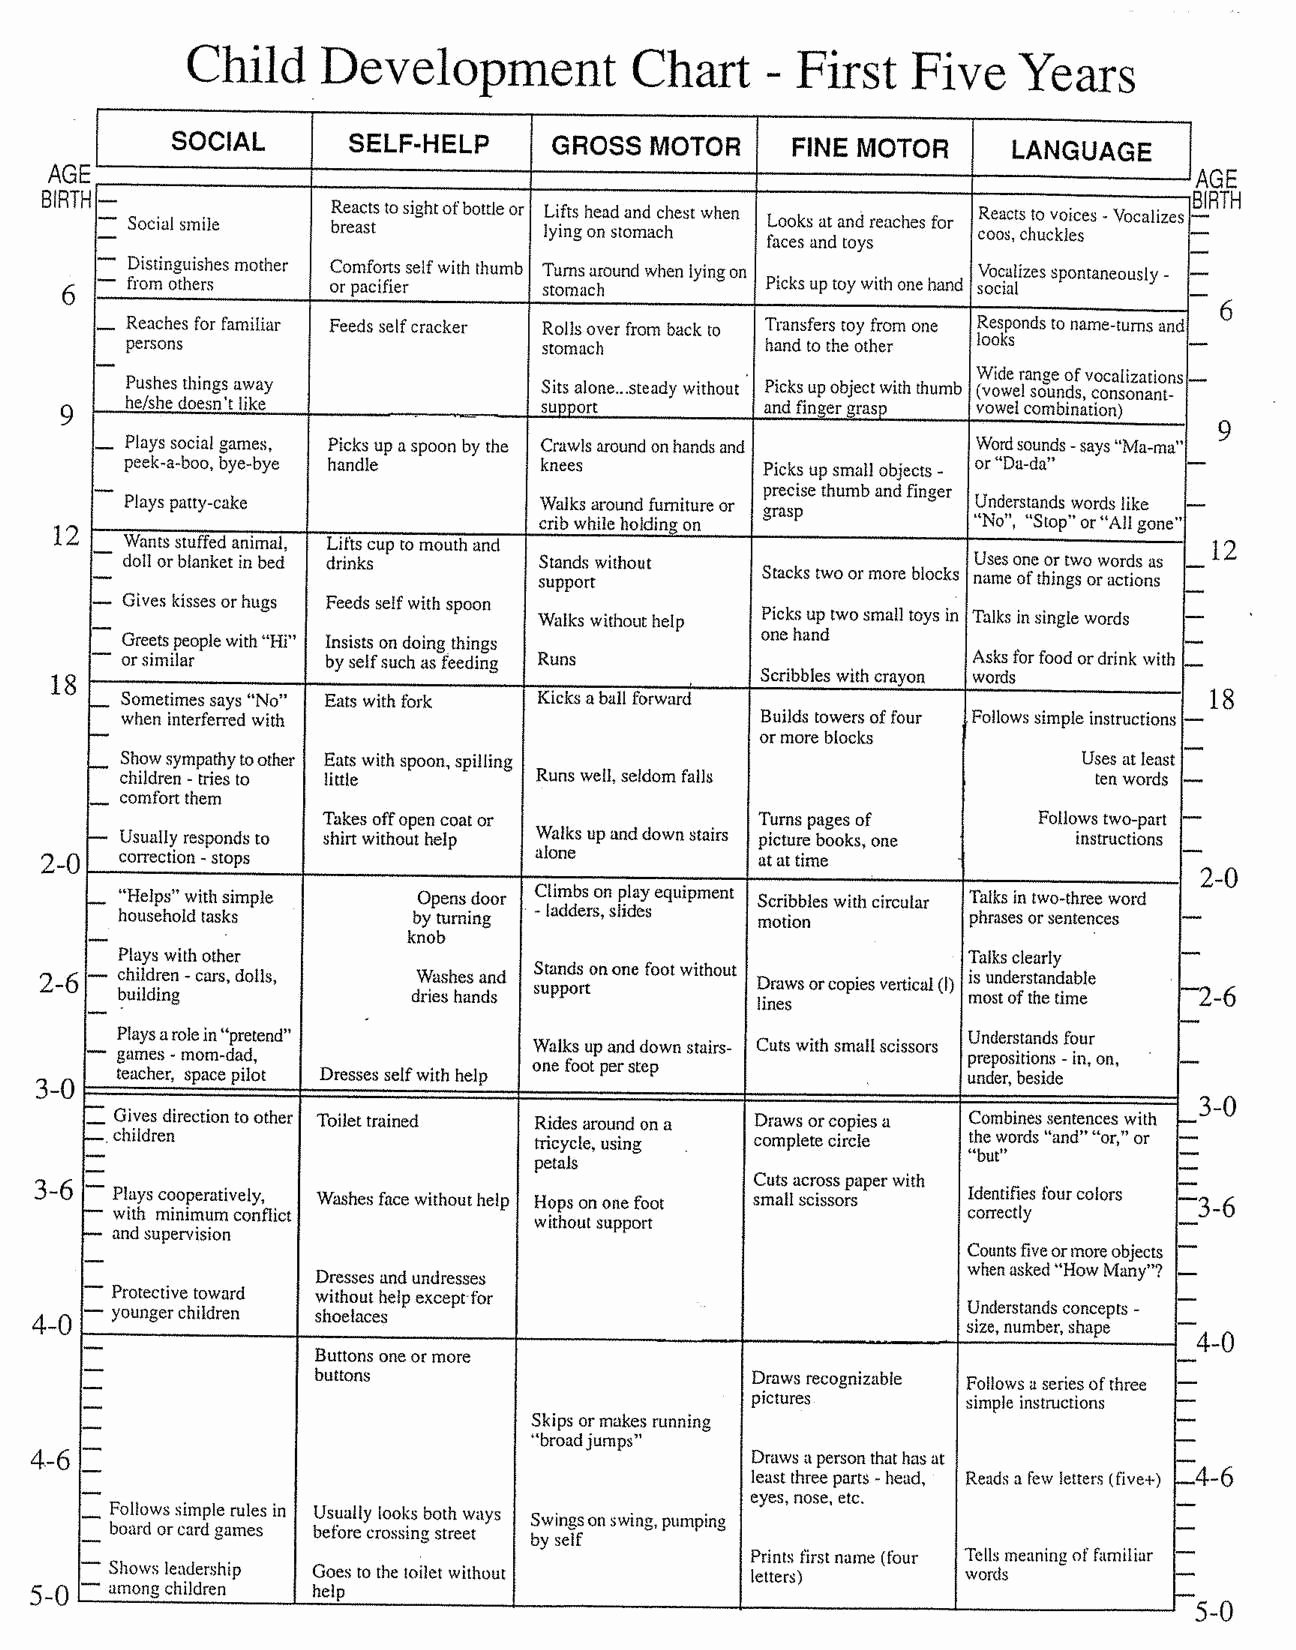 Human Population Growth Worksheet Answer Unique Population Growth Worksheet Answers Worksheet Idea Template